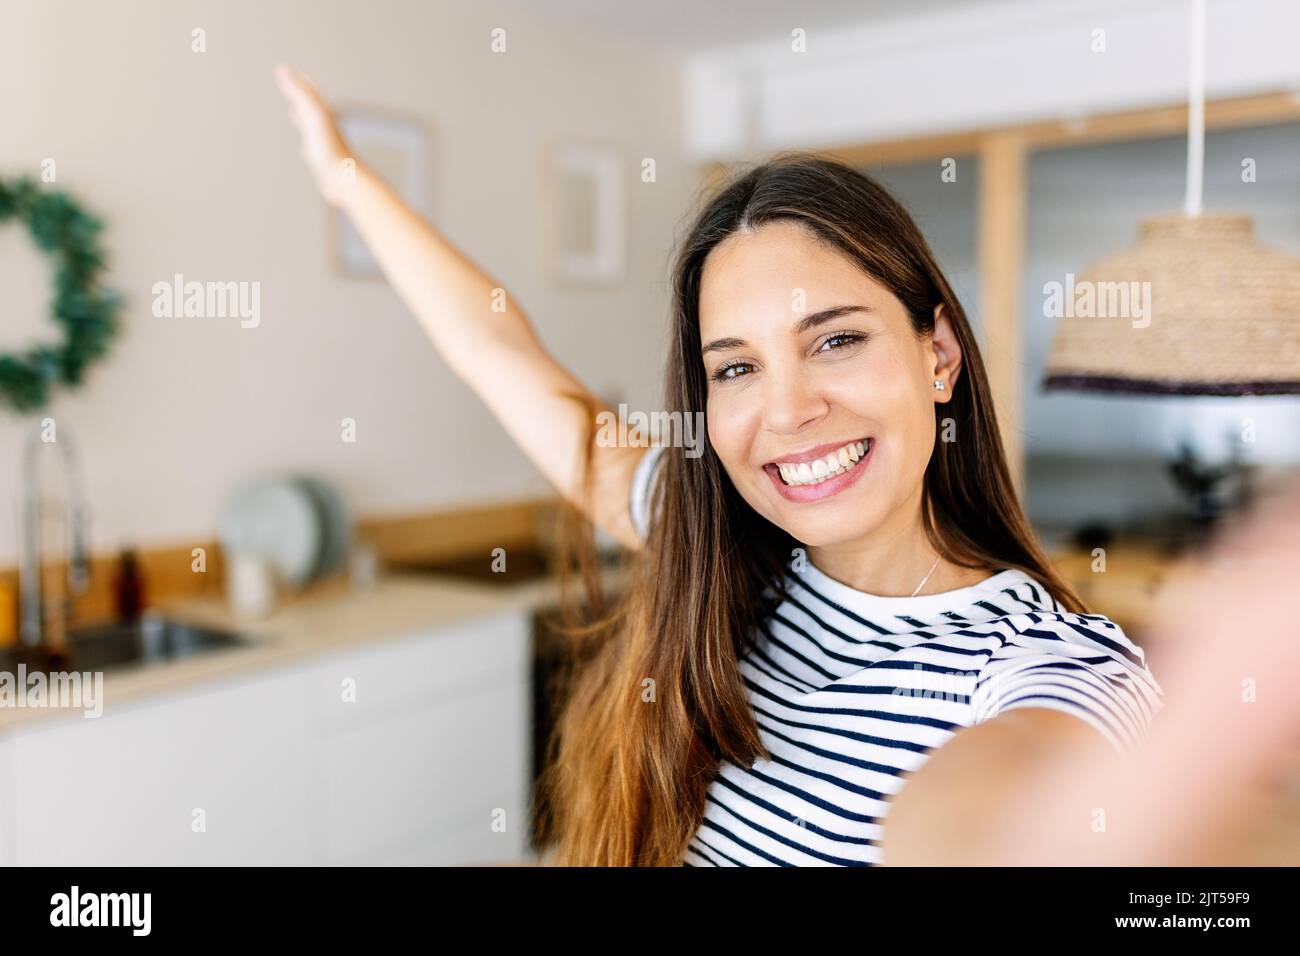 Serene happy young adult woman taking selfie portrait with phone at home Stock Photo